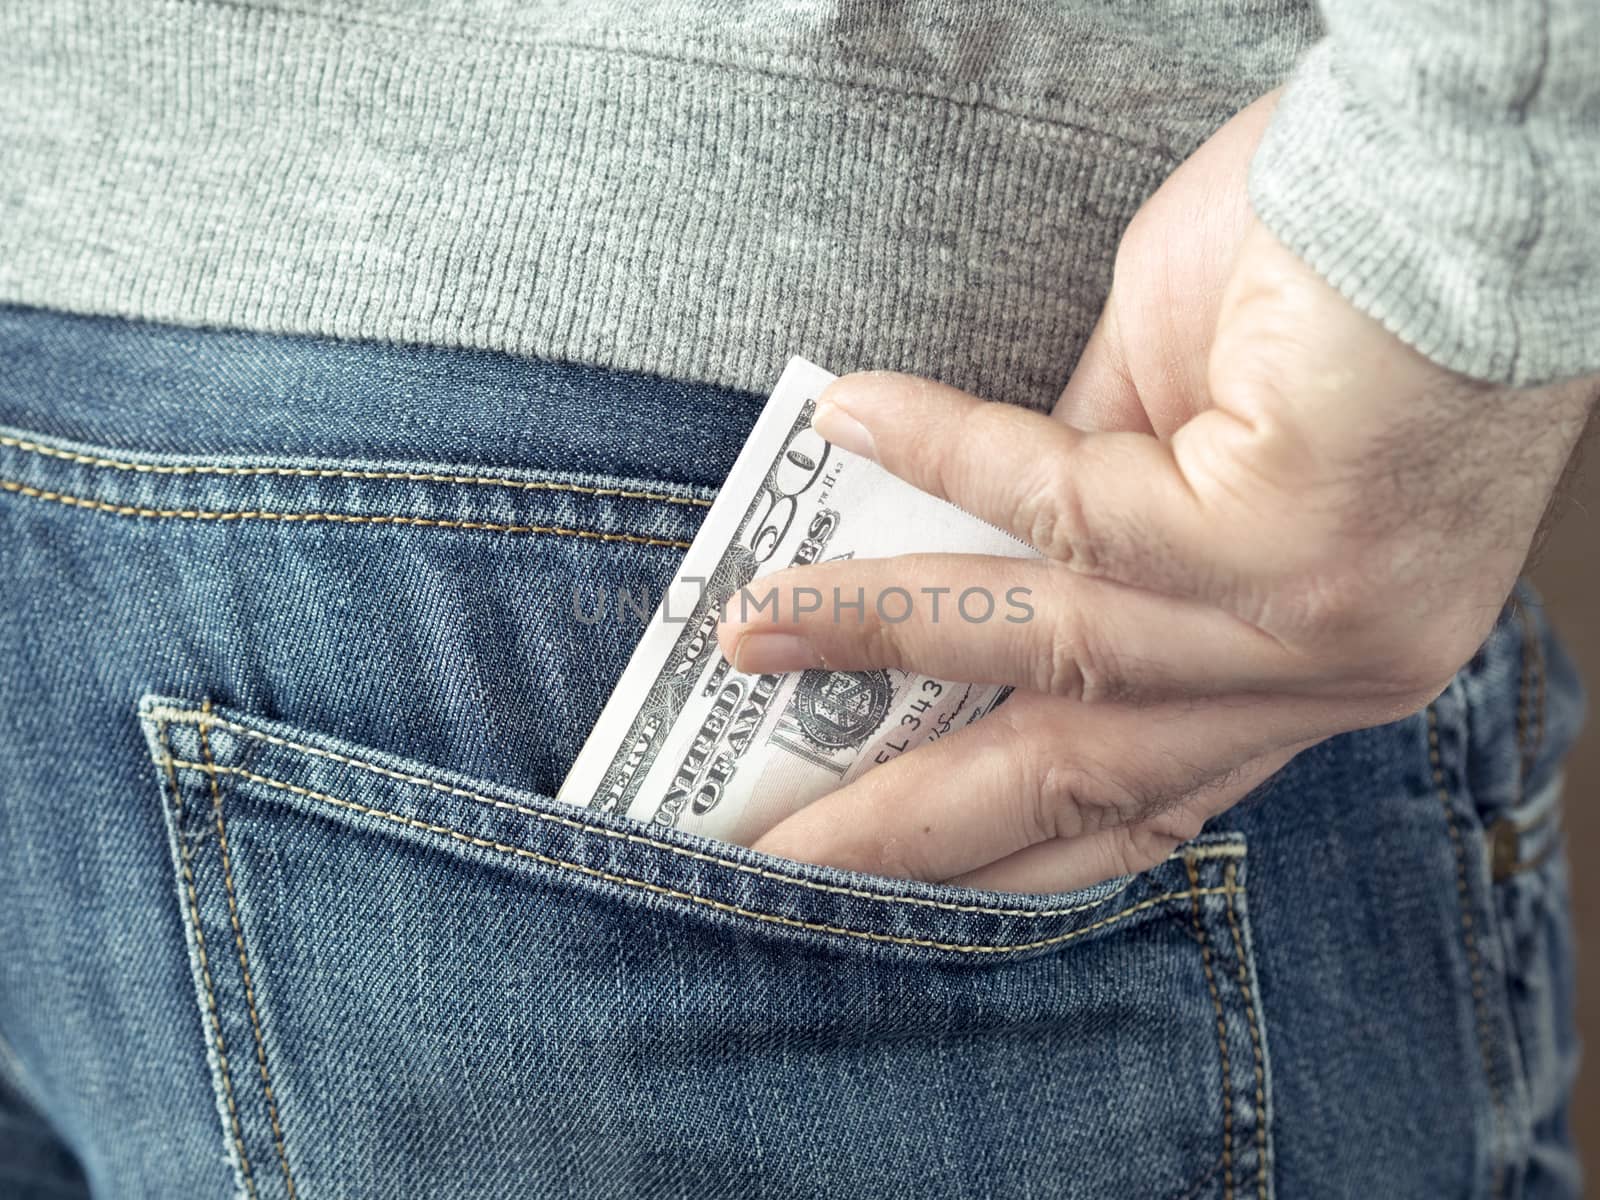 his hand put dollars in jeans pocket or take out from pocket